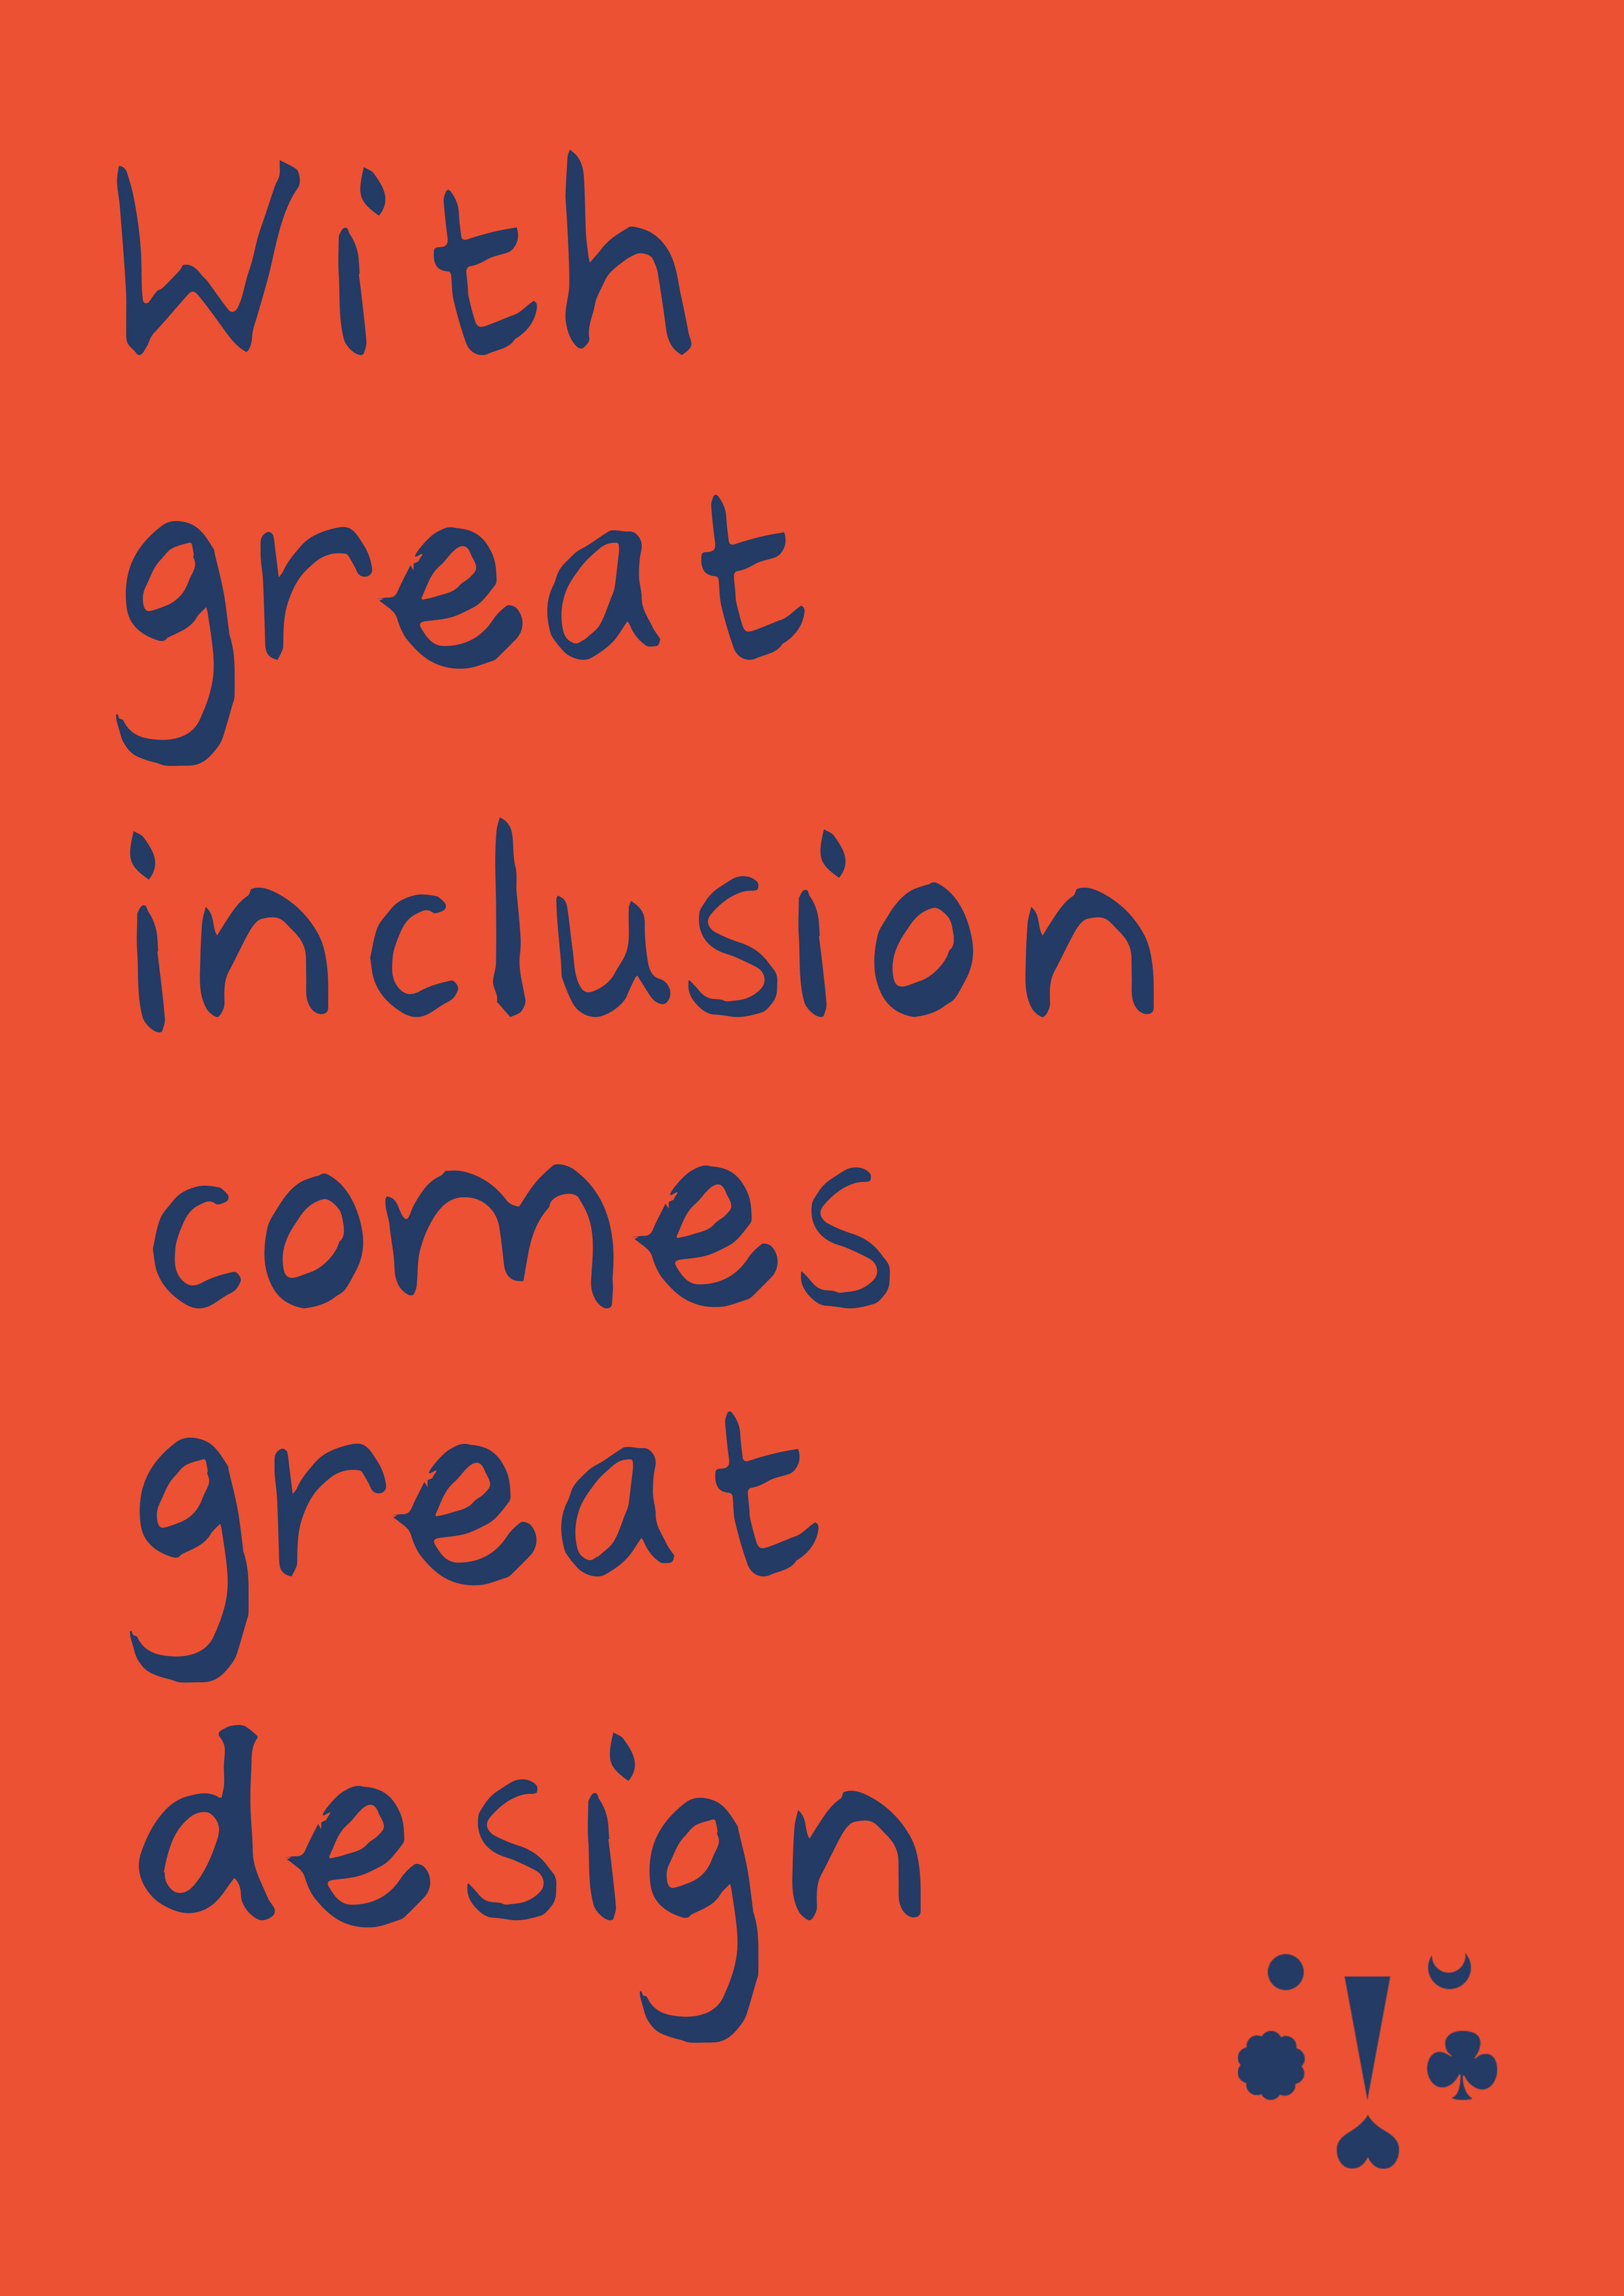 With great inclusion comes great design